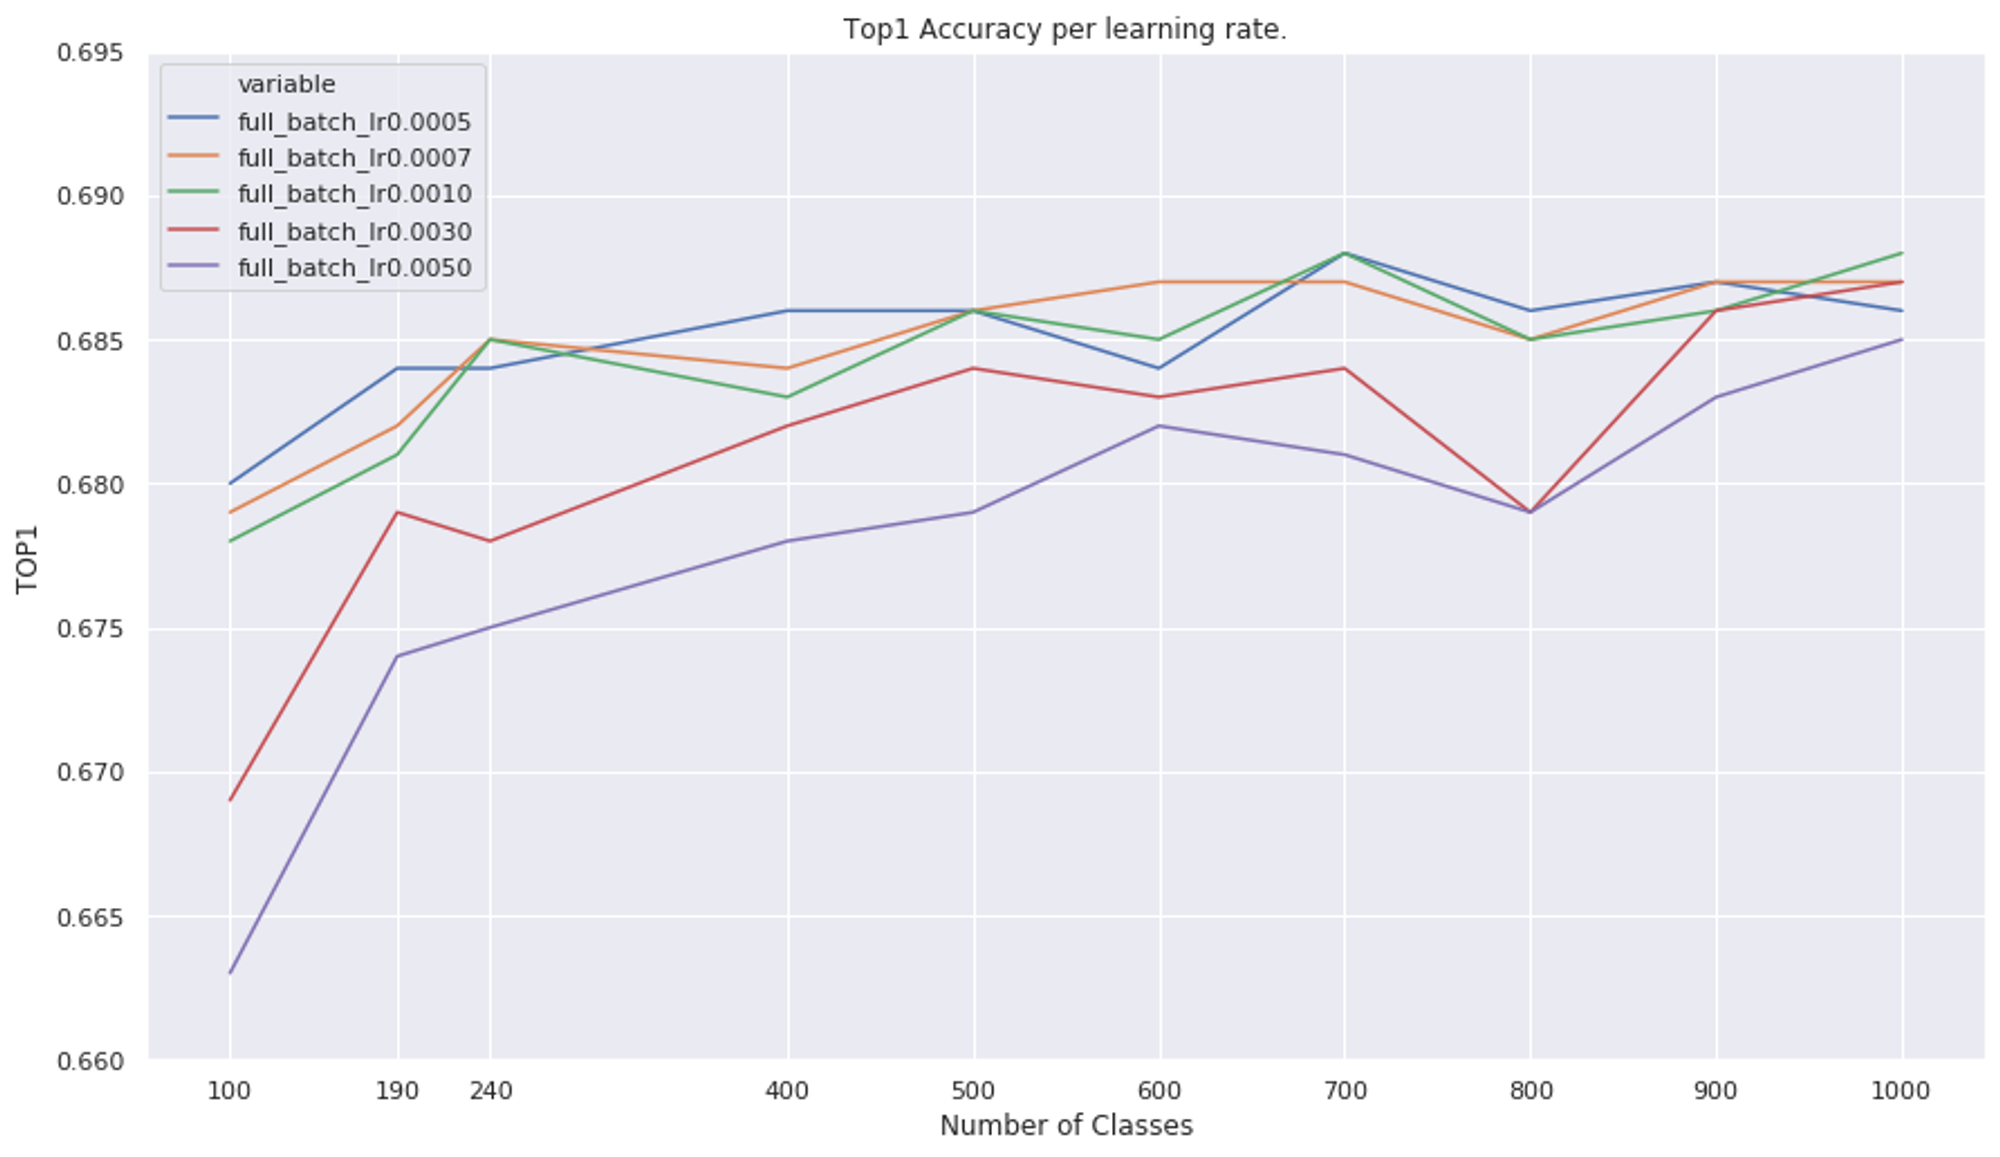 The Top 1 accuracy by number of classes in the training set.